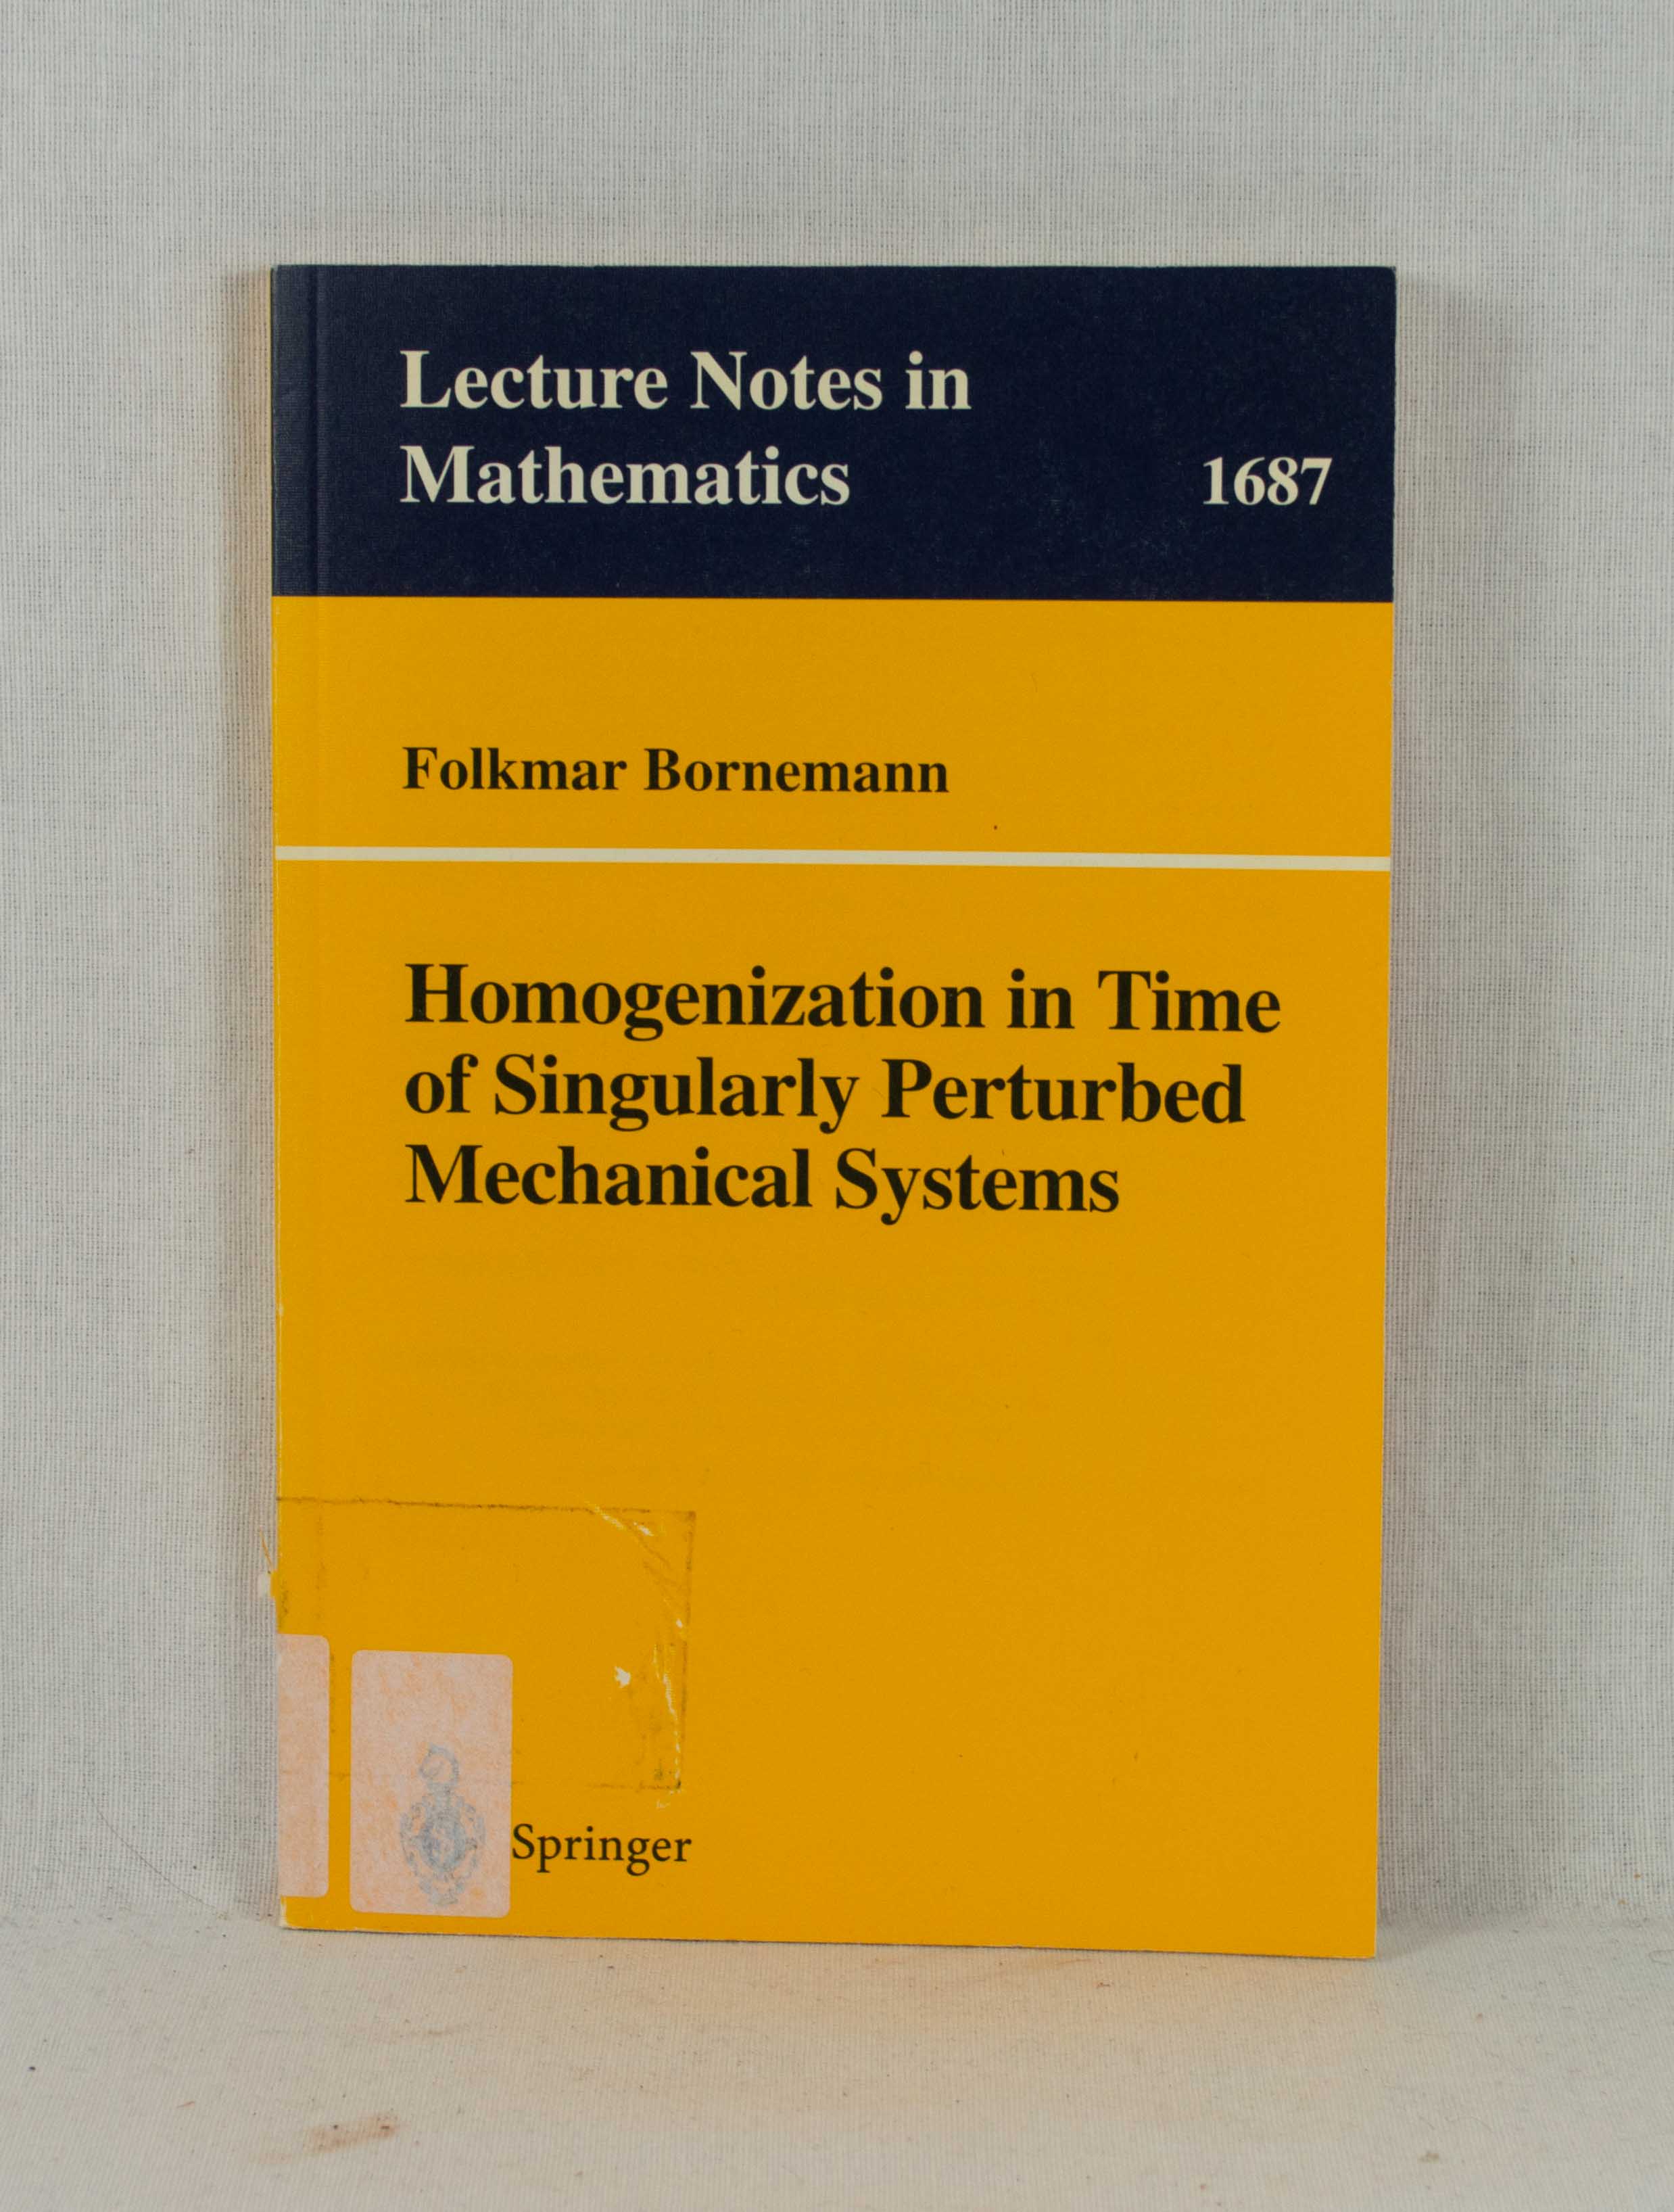 Homogenization in Time of Singularly Perturbed Mechanical Systems. (= Lecture Notes in Mathematics, Vol. 1687). - Bornemann, Folkmar